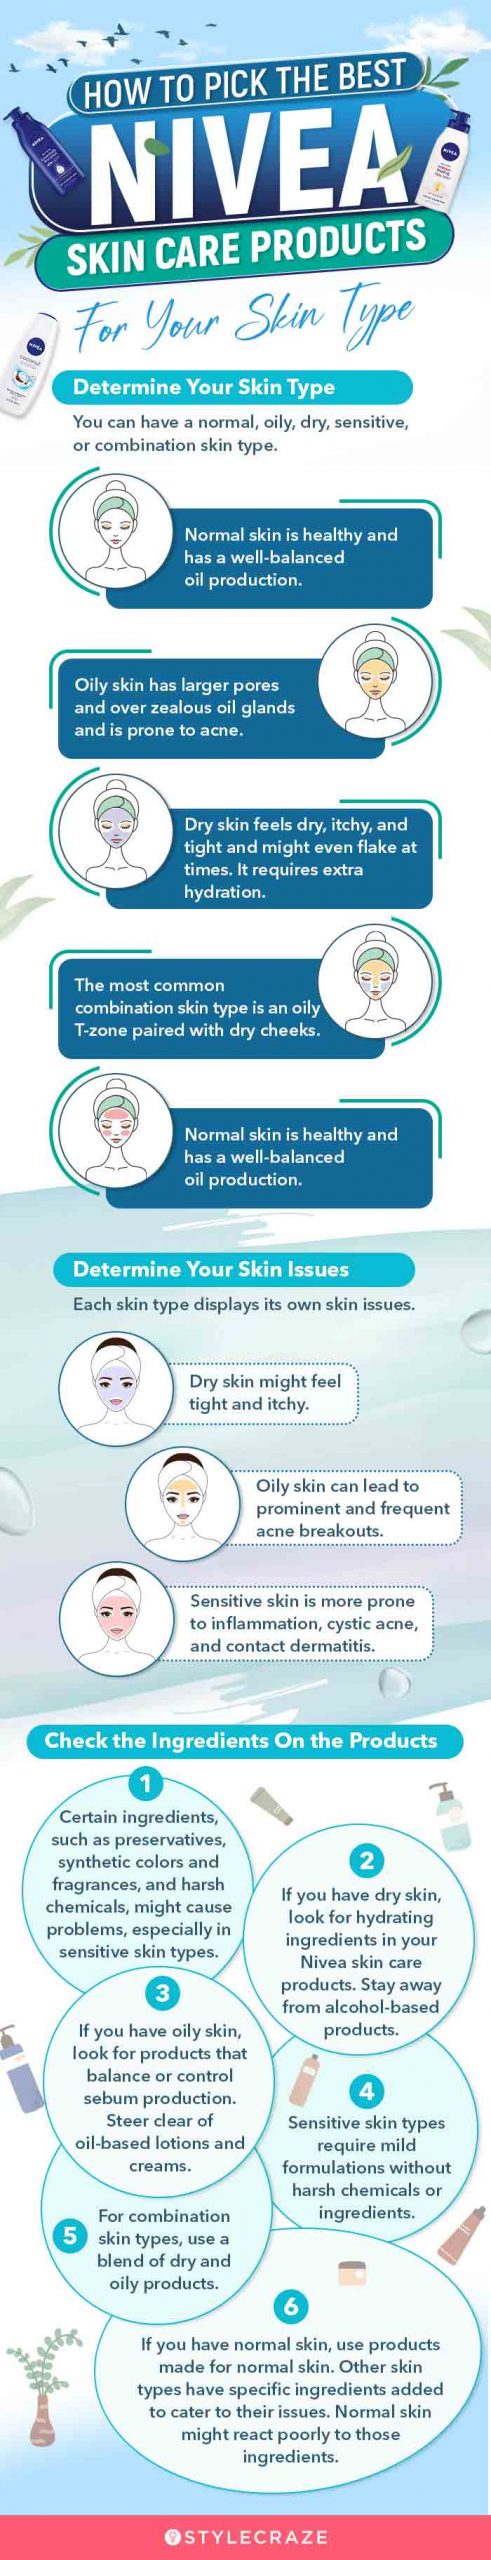 How-To-Pick-The-Best-Nivea-Skin-Care-Products-For-Your-Skin-Type